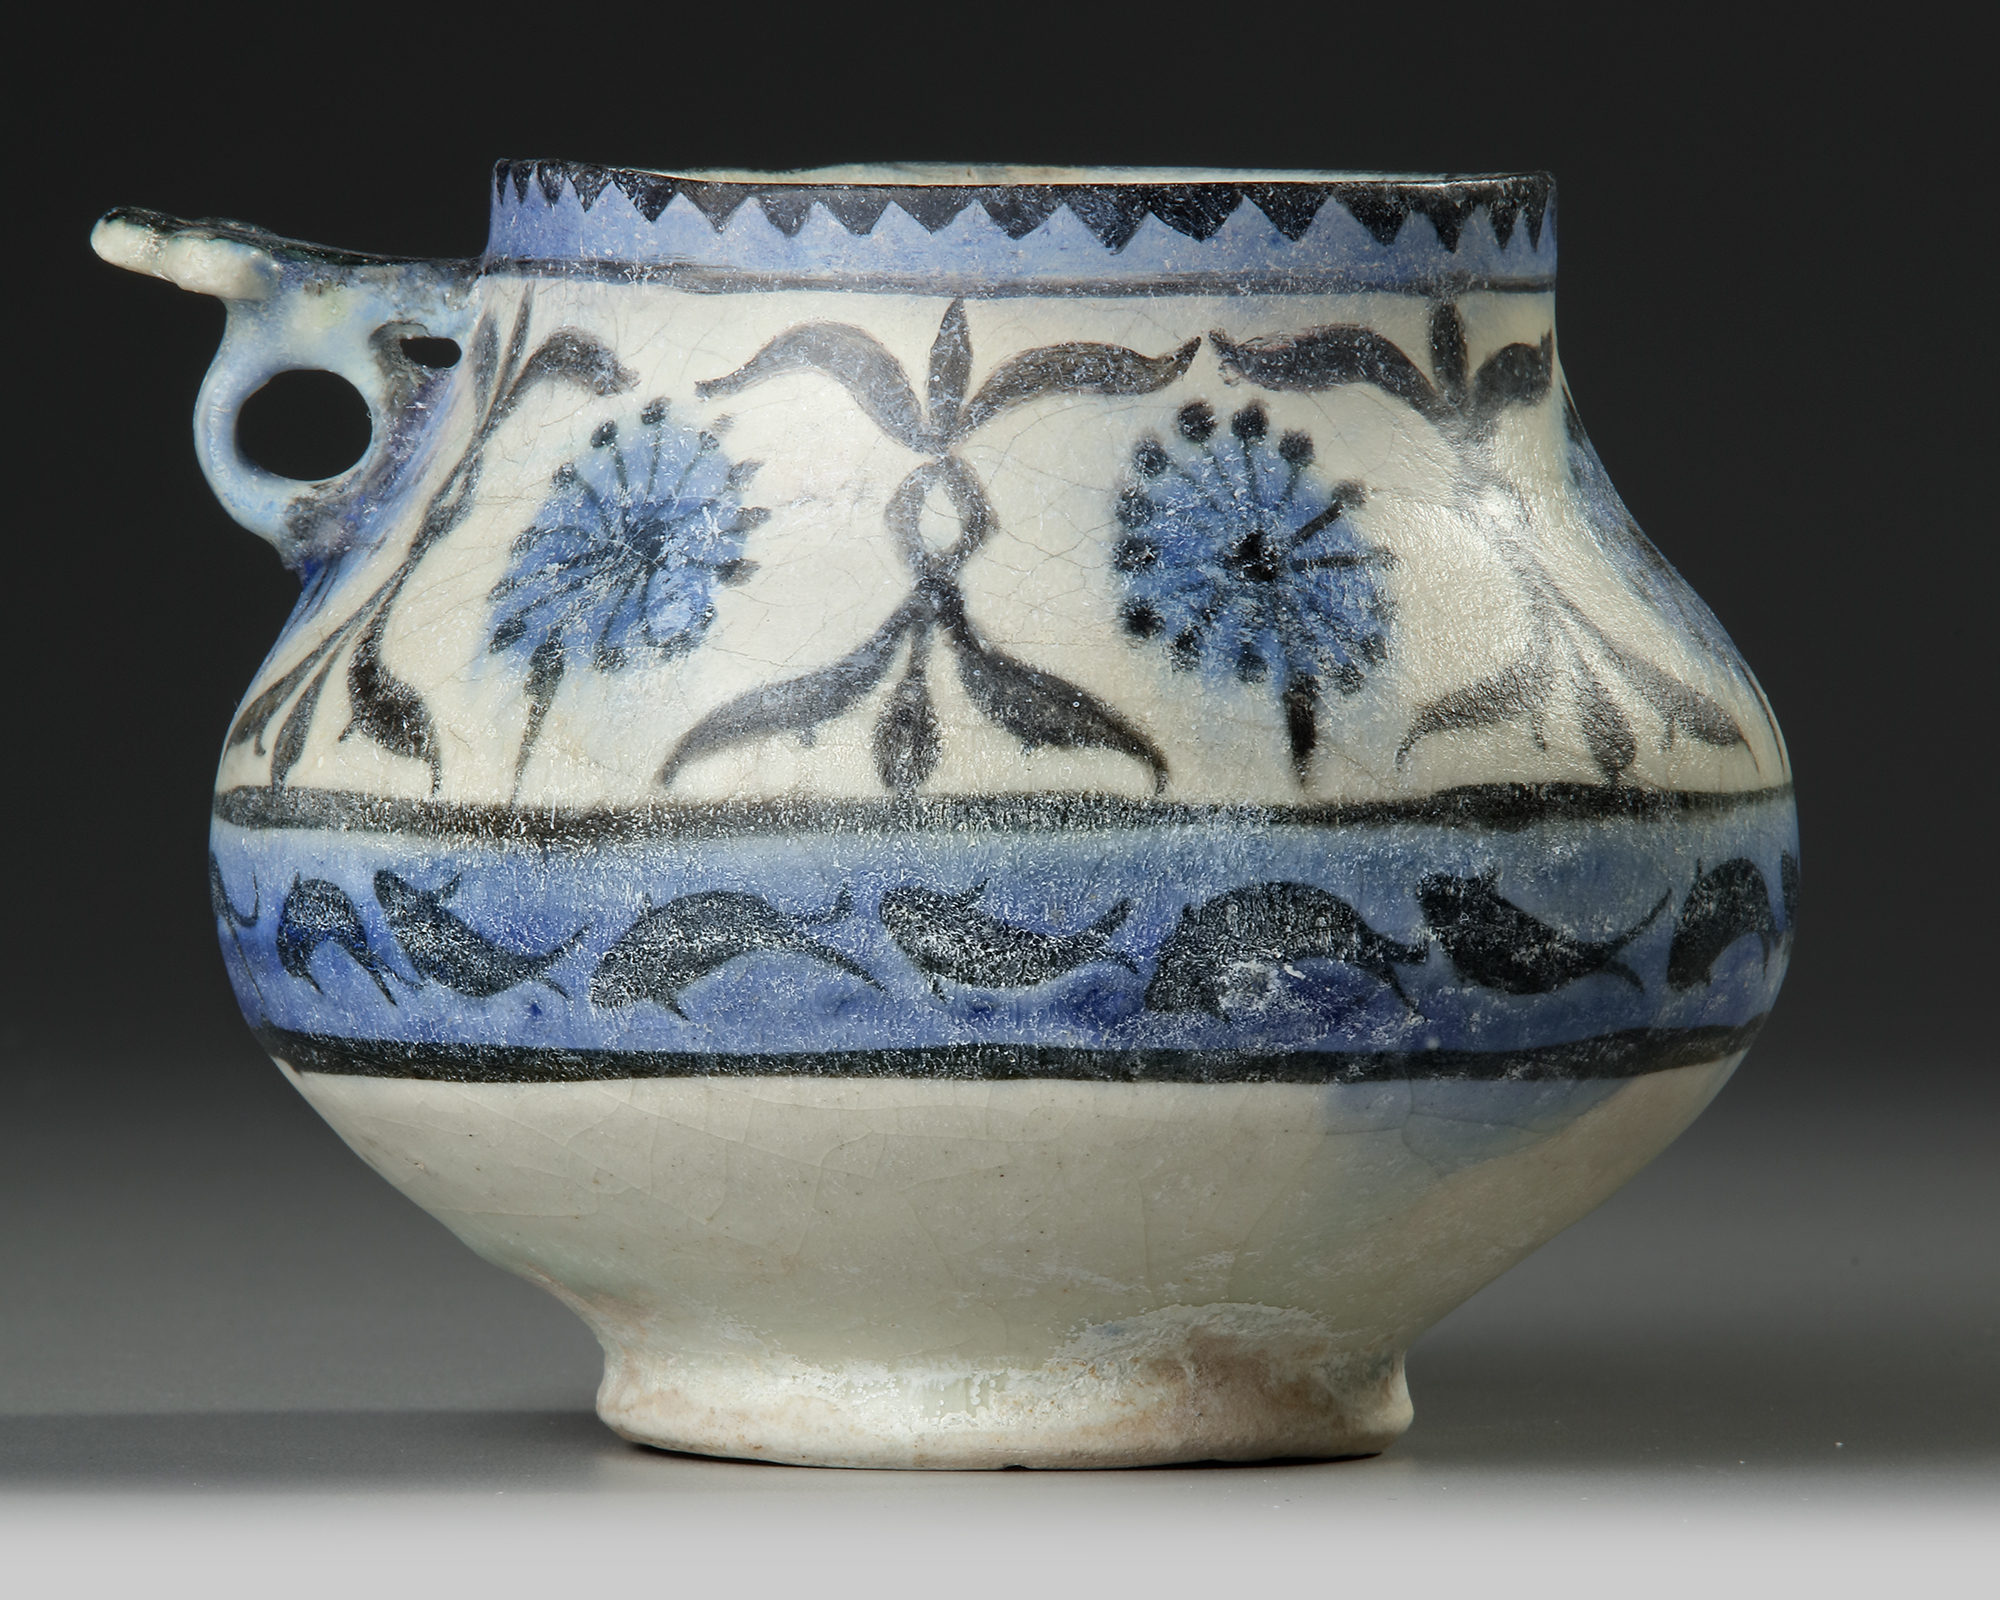 A KASHAN POTTERY JUG, PERSIA, EARLY 13TH CENTURY - Image 2 of 8